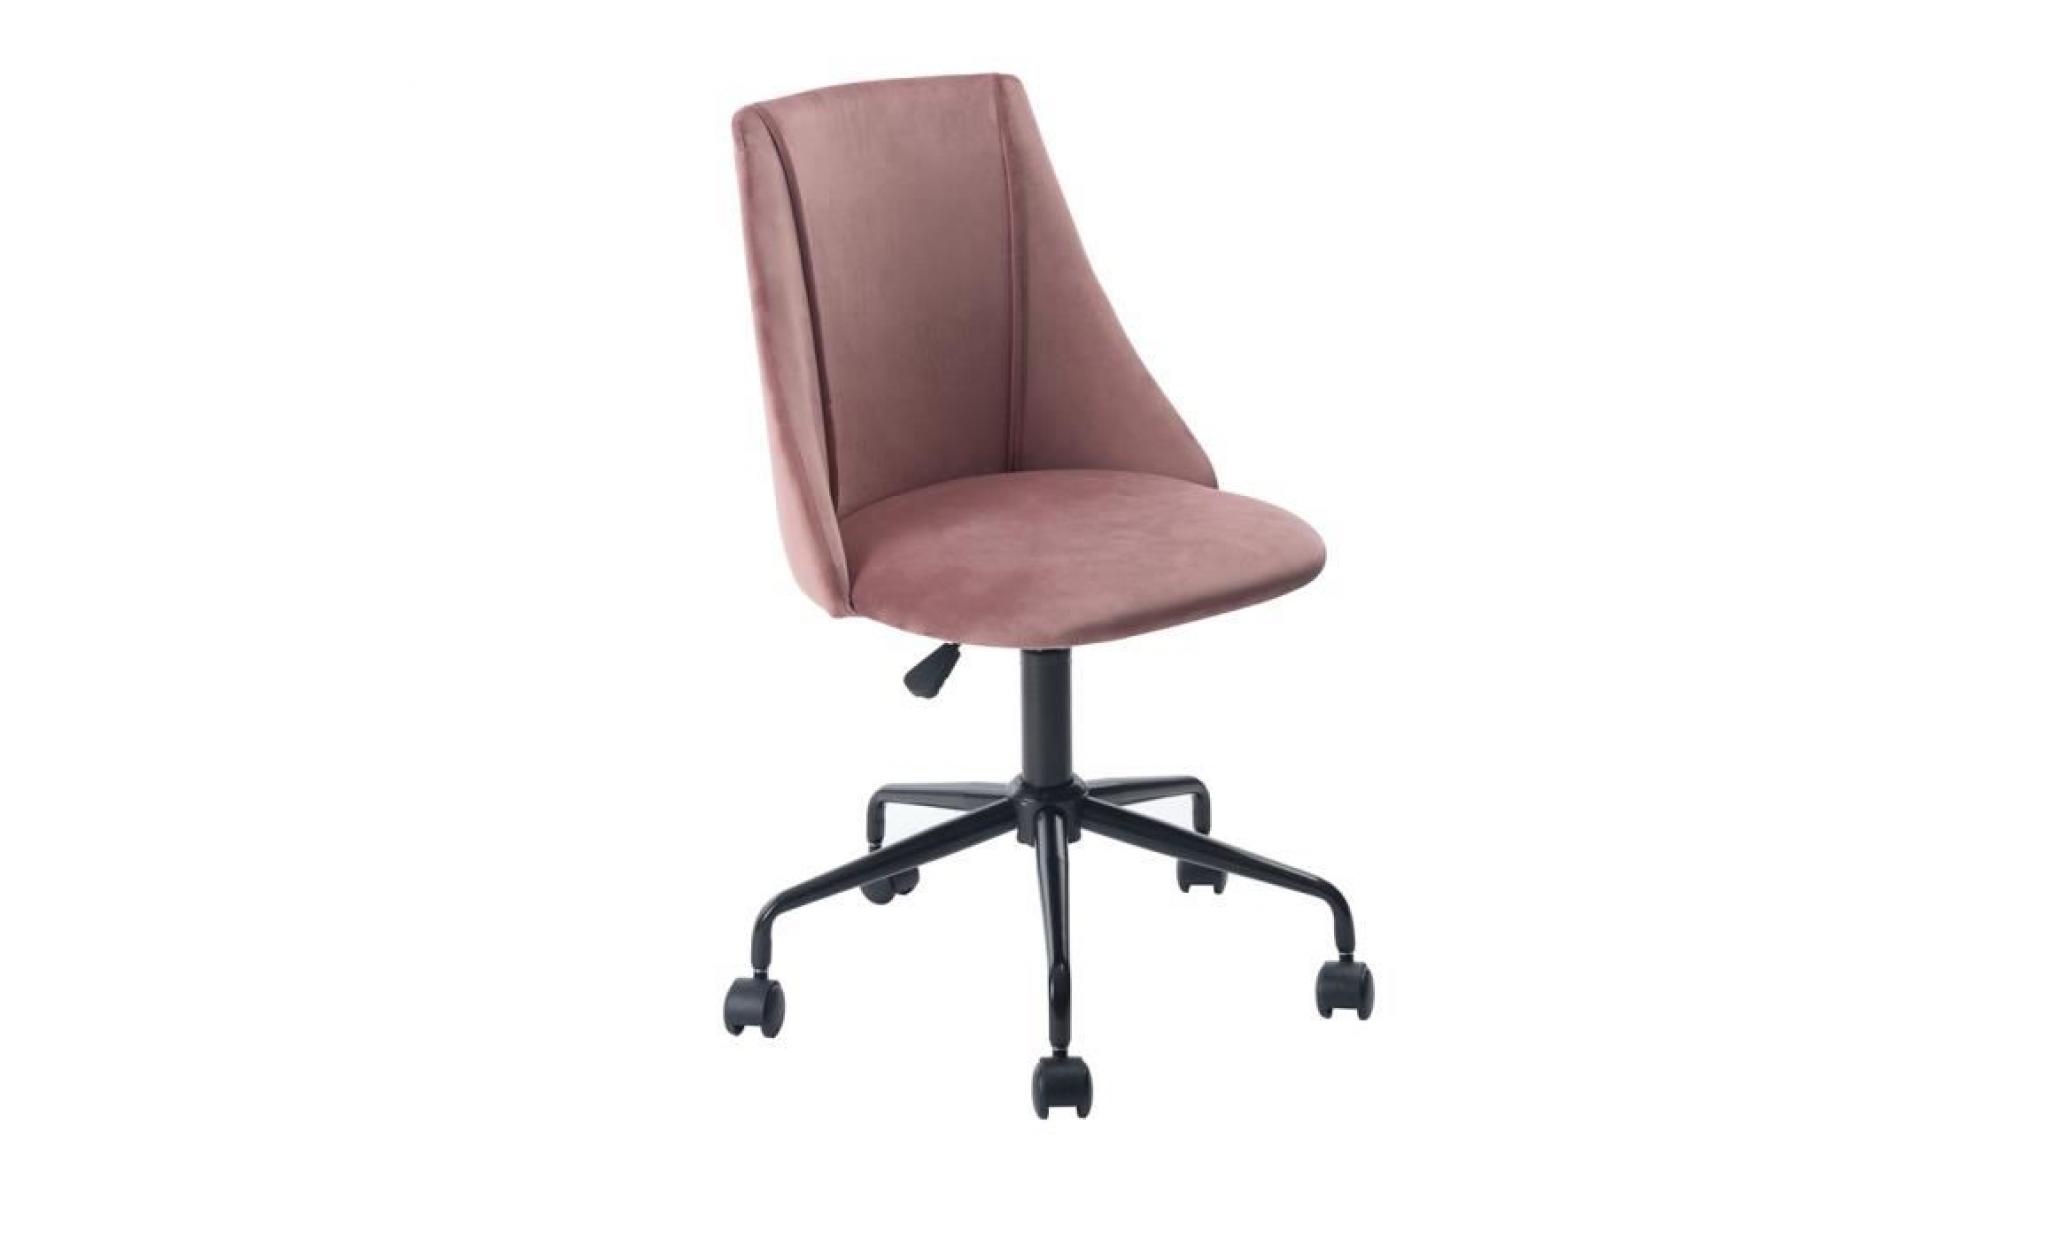 furnish 1 velvet office chair padded velvet foam seat with rotation height and casters,gris